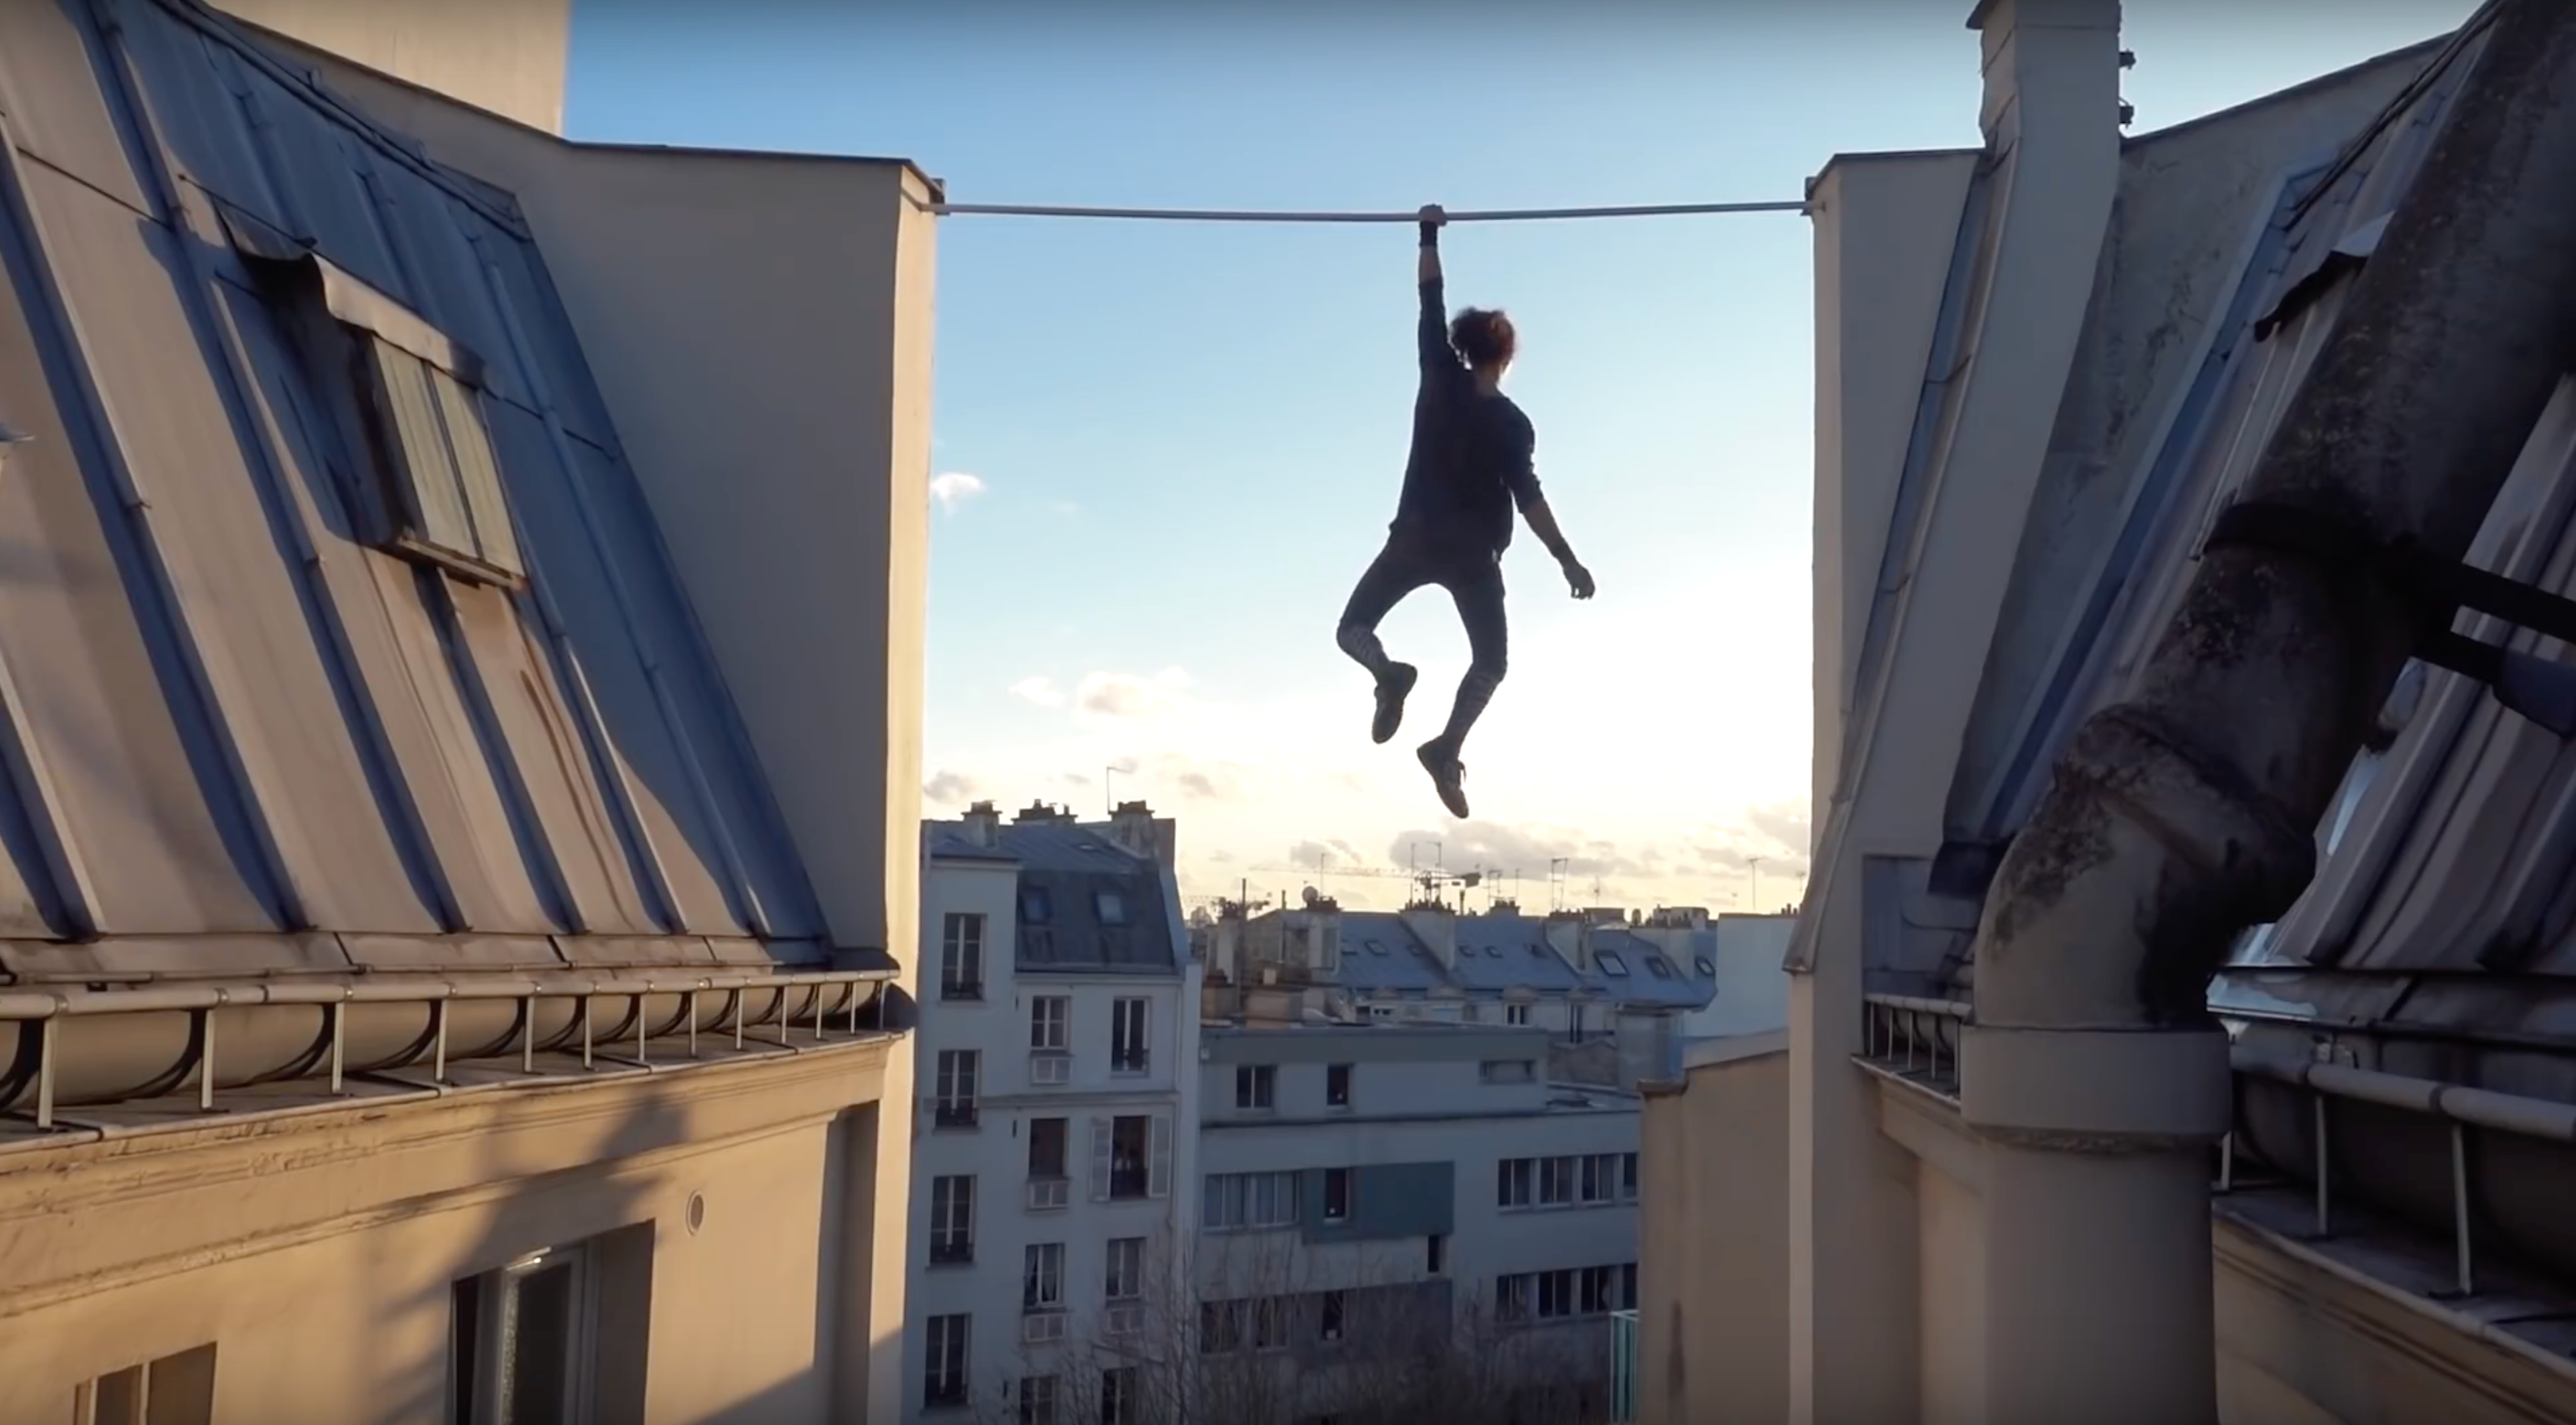 Best Parkour Videos Of 18 The Motus Projects